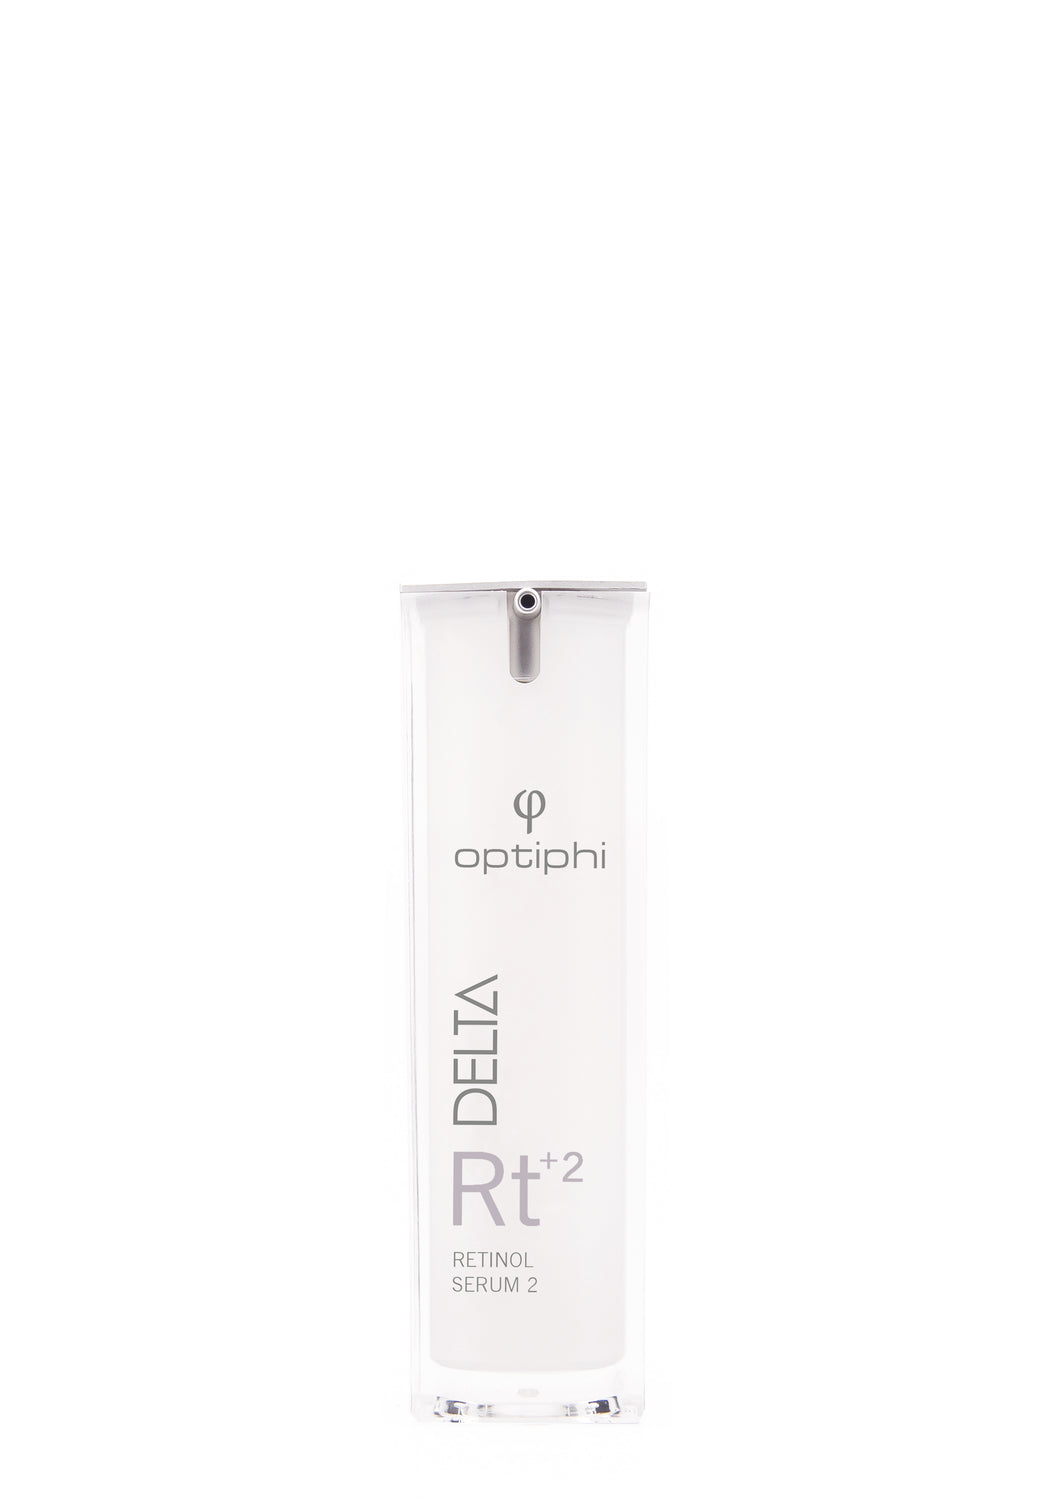 The unique, in-house designed delivery system ensures maximum activity with minimal irritation. This serum was developed to boost the activity of other DELTA products to reduce the signs of aging, including wrinkling, fine lines, sagging and volume loss, as well as pigmentation concerns.